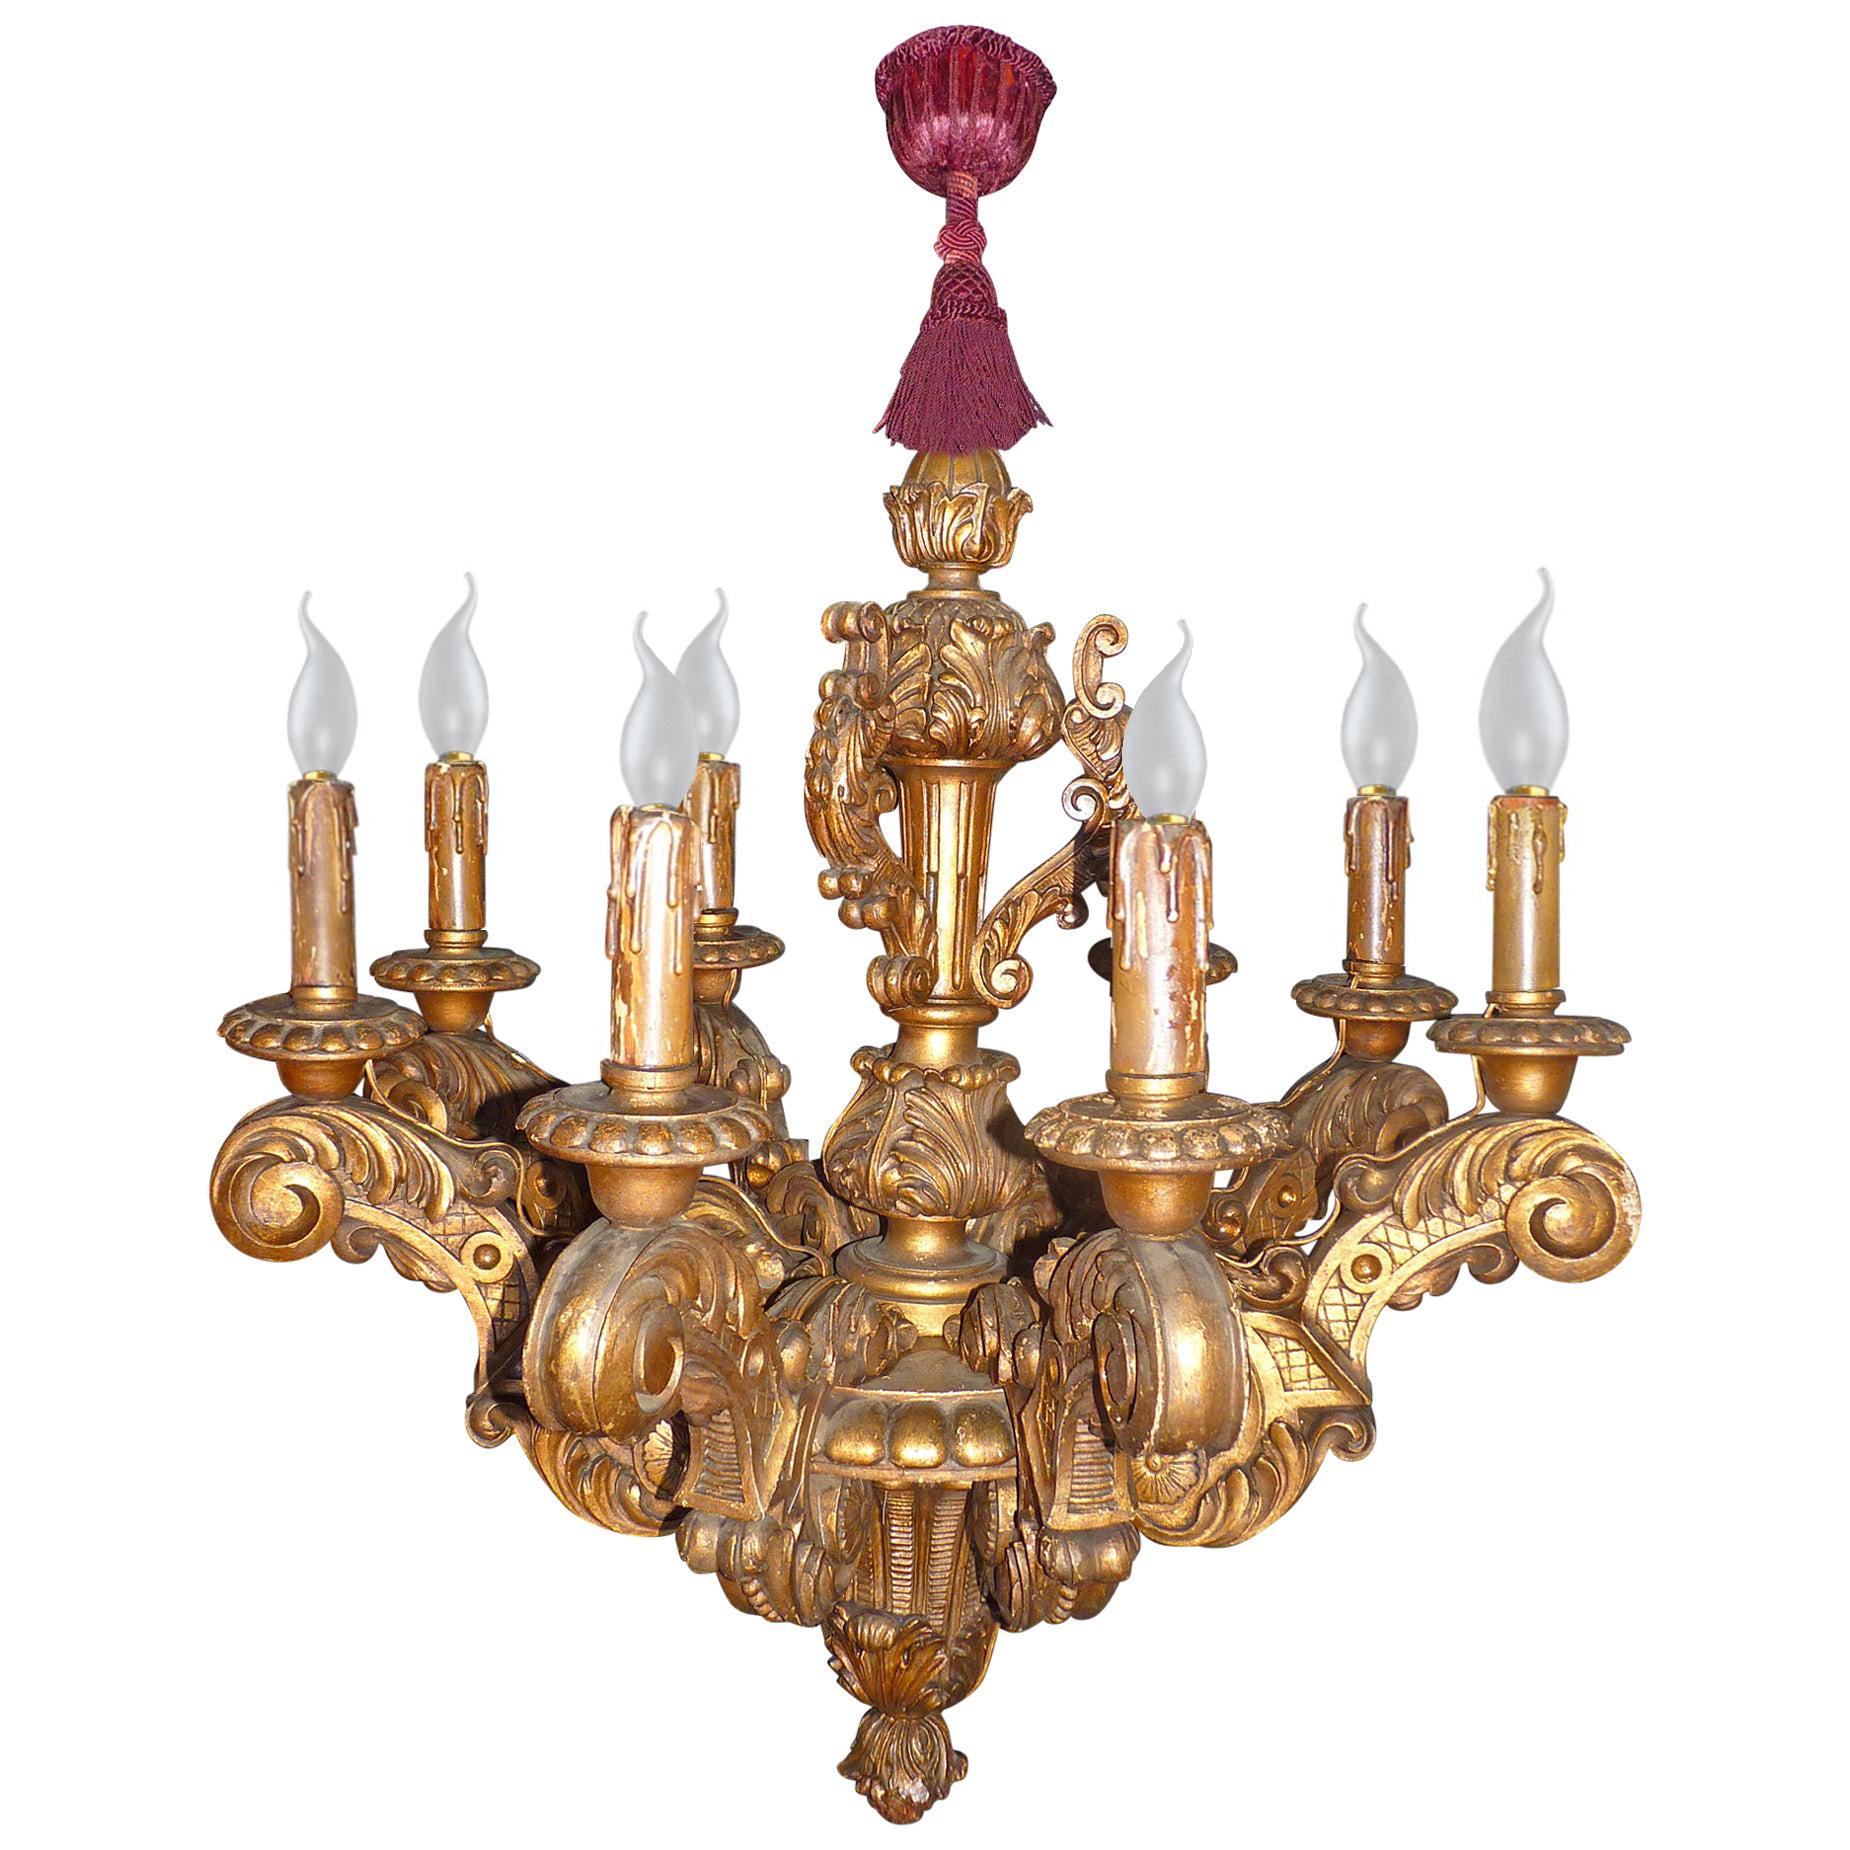 Louis XVI Massive French Louis XV Baroque Gilt Carved Wood 8-Light Chandelier 19th Century For Sale